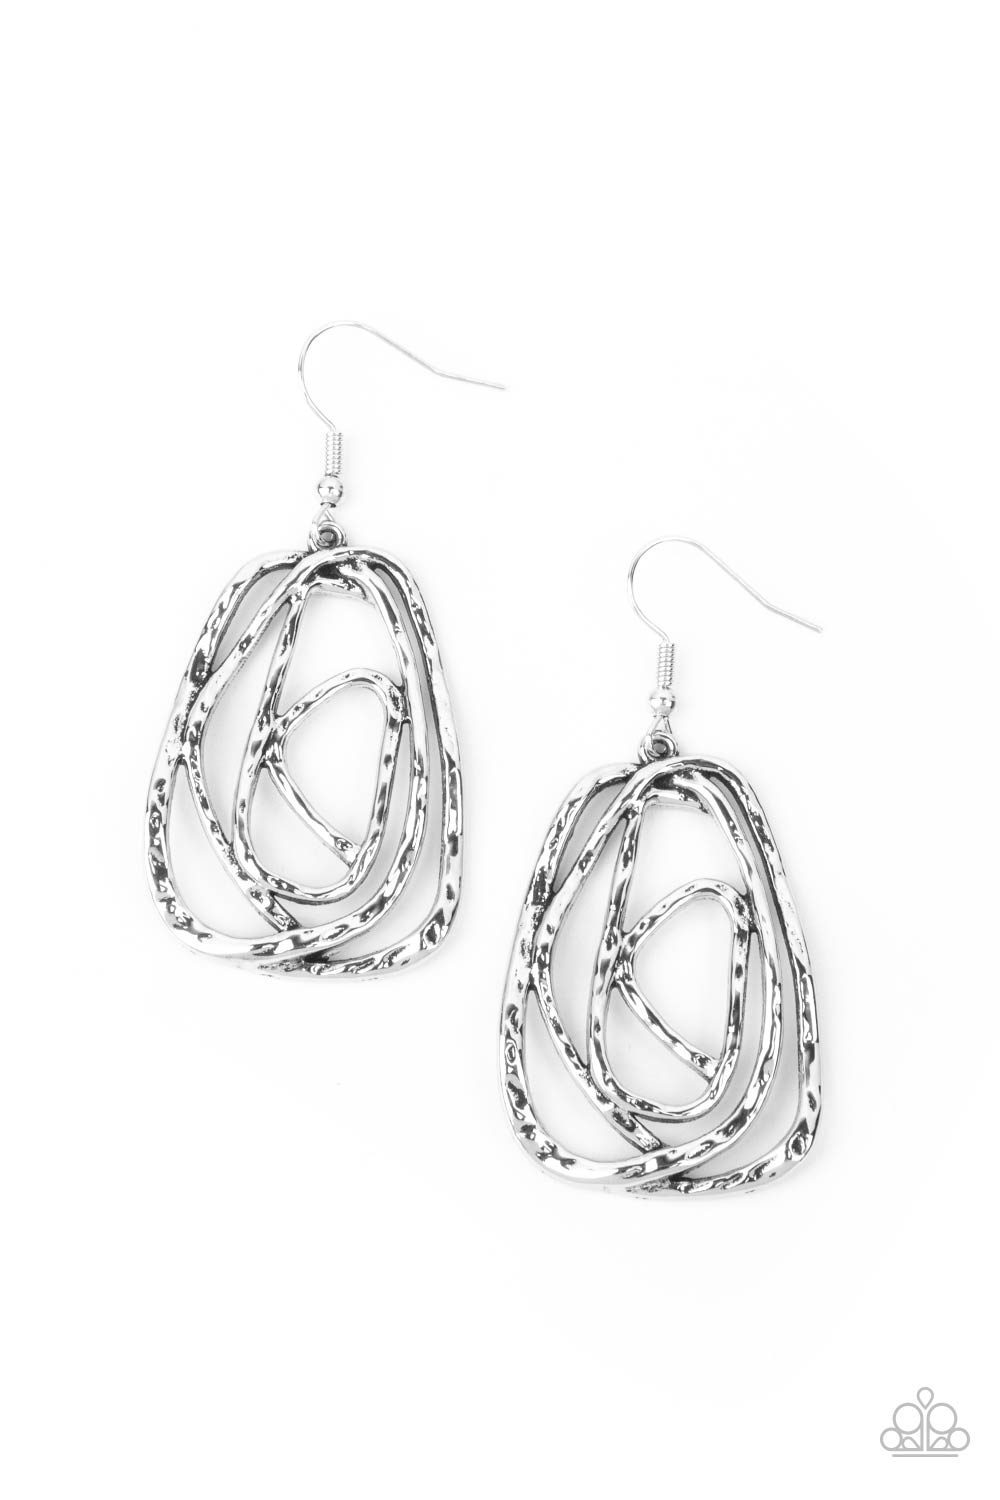 hammered finish, a rustic silver wire delicately wraps into an asymmetrical frame 